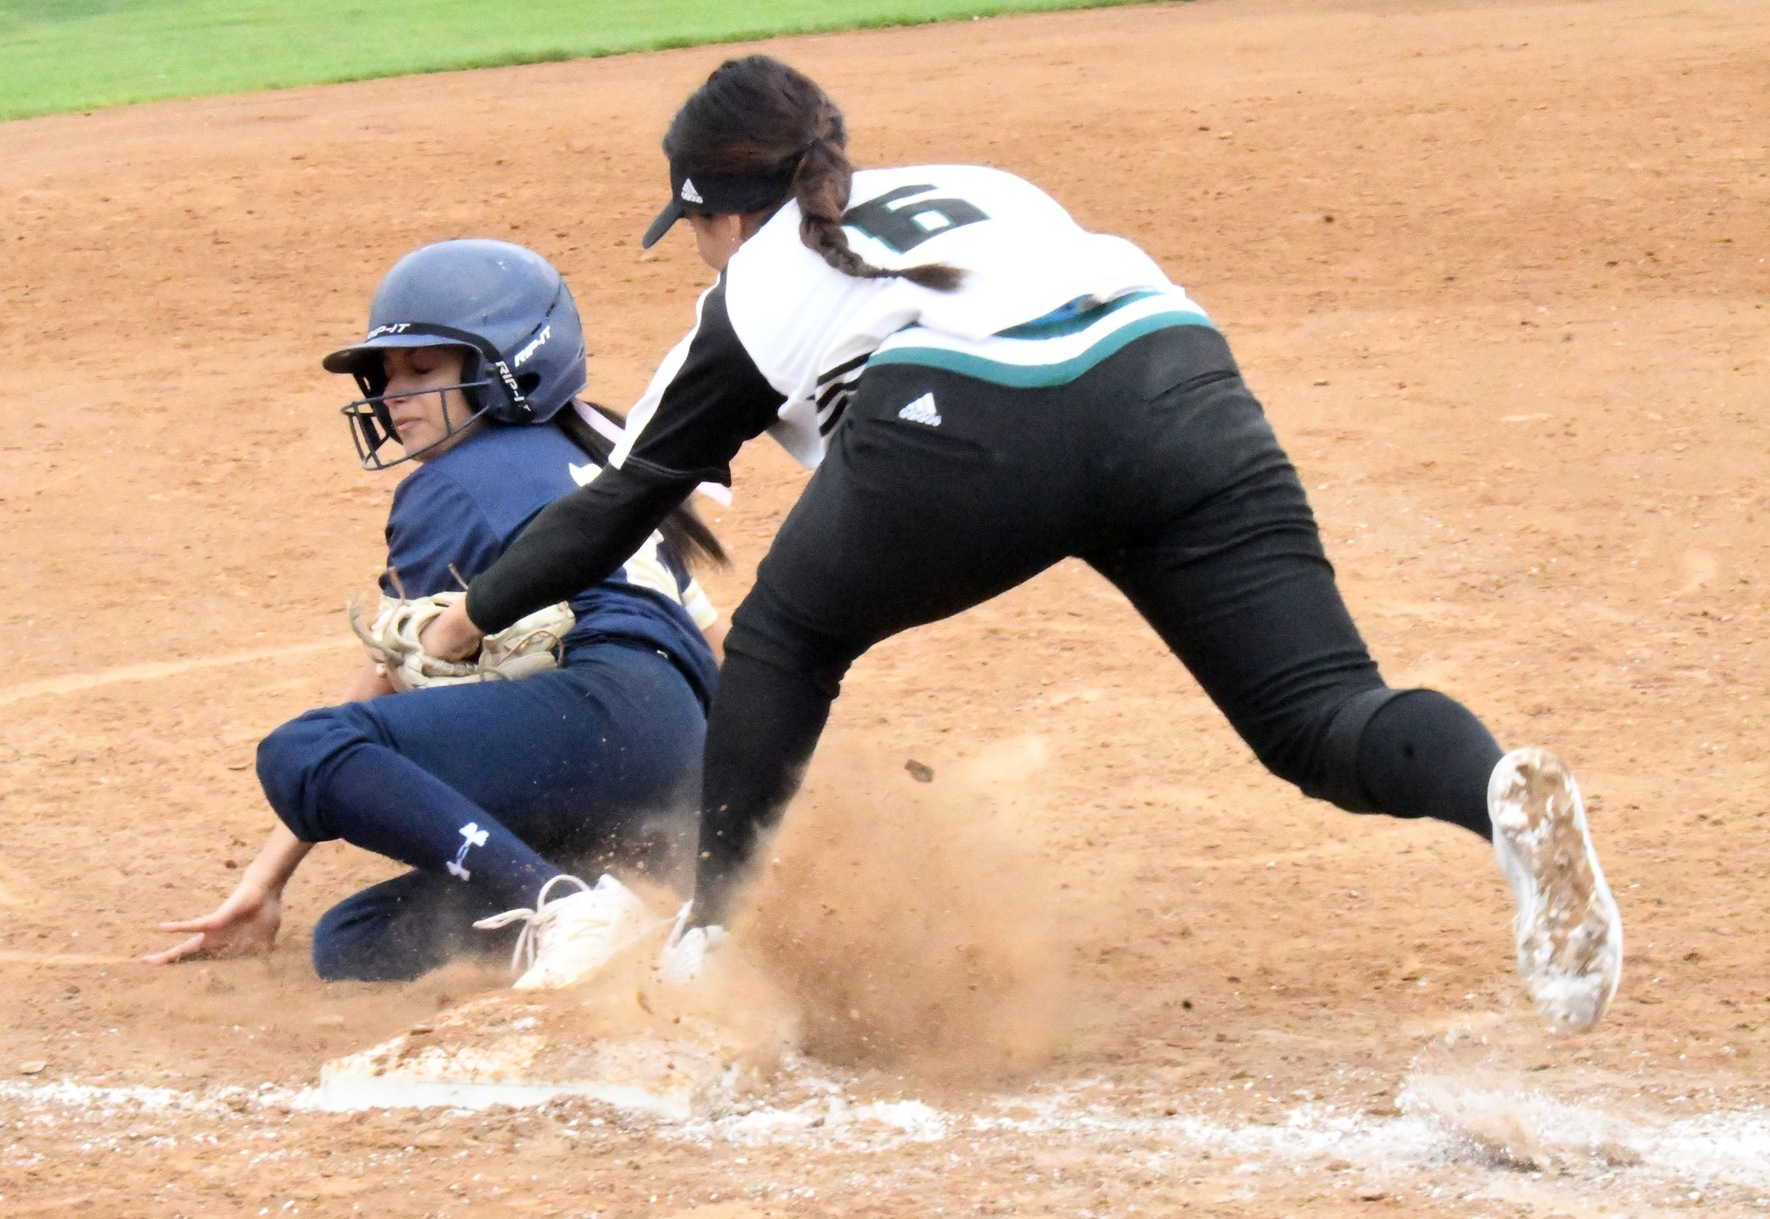 East Los Angeles College sophomore Destiny Avena tries to tag LA Harbor College's Natalie Saucedo at third base in a 9-5 Huskies win over the Seahawks. (Photo by DeeDee Jackson)